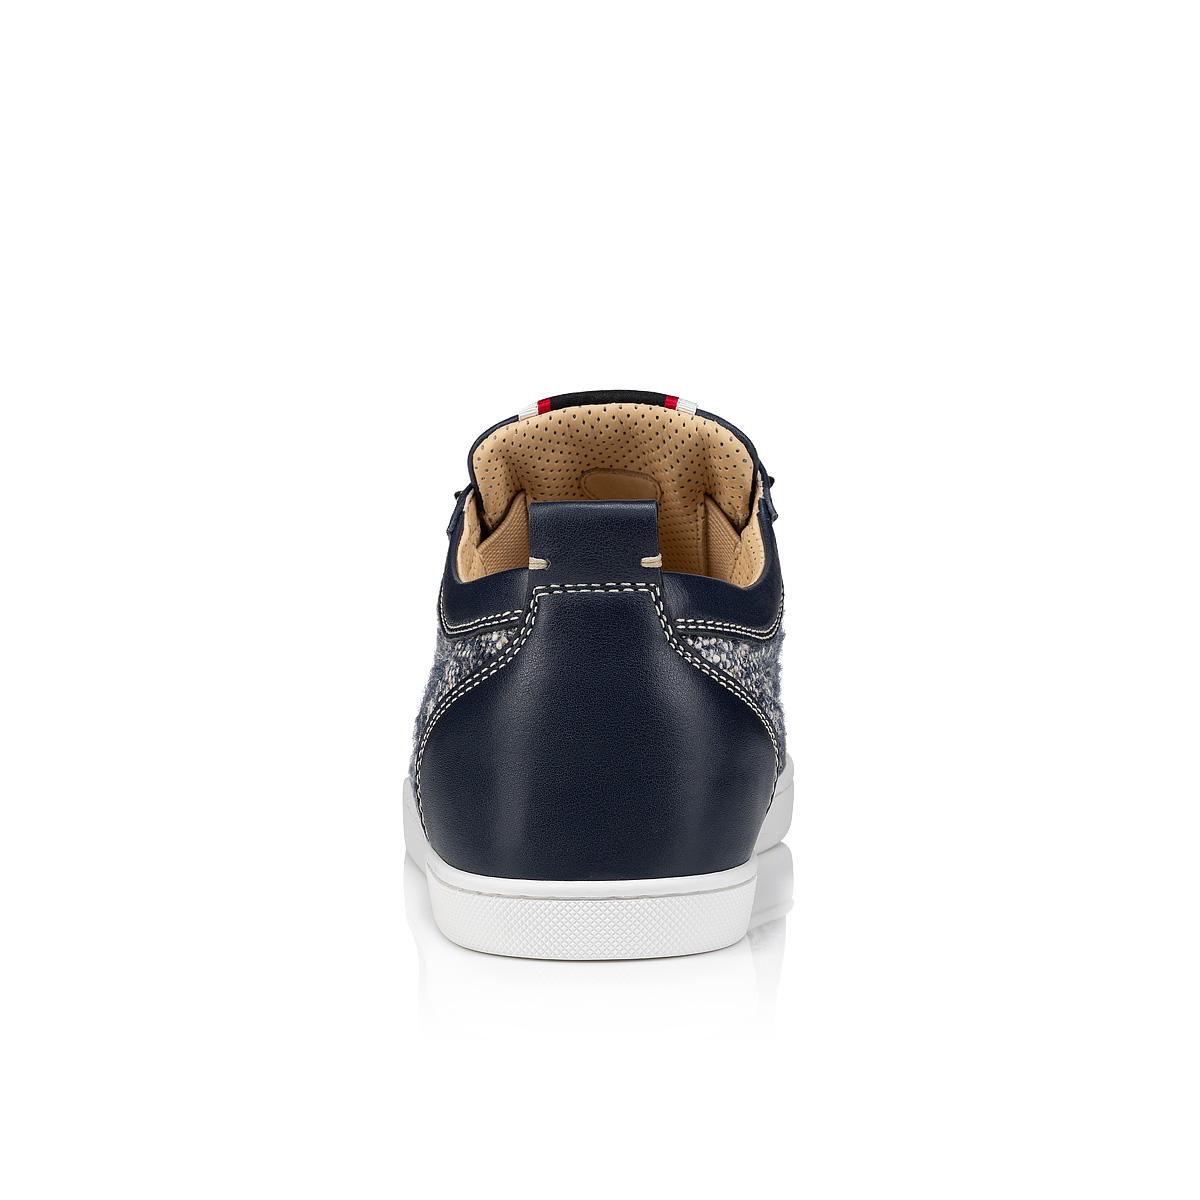 F.A.V Fique A Vontade Christian States Navy and - Wool - - leather United Louboutin - calf Sneakers